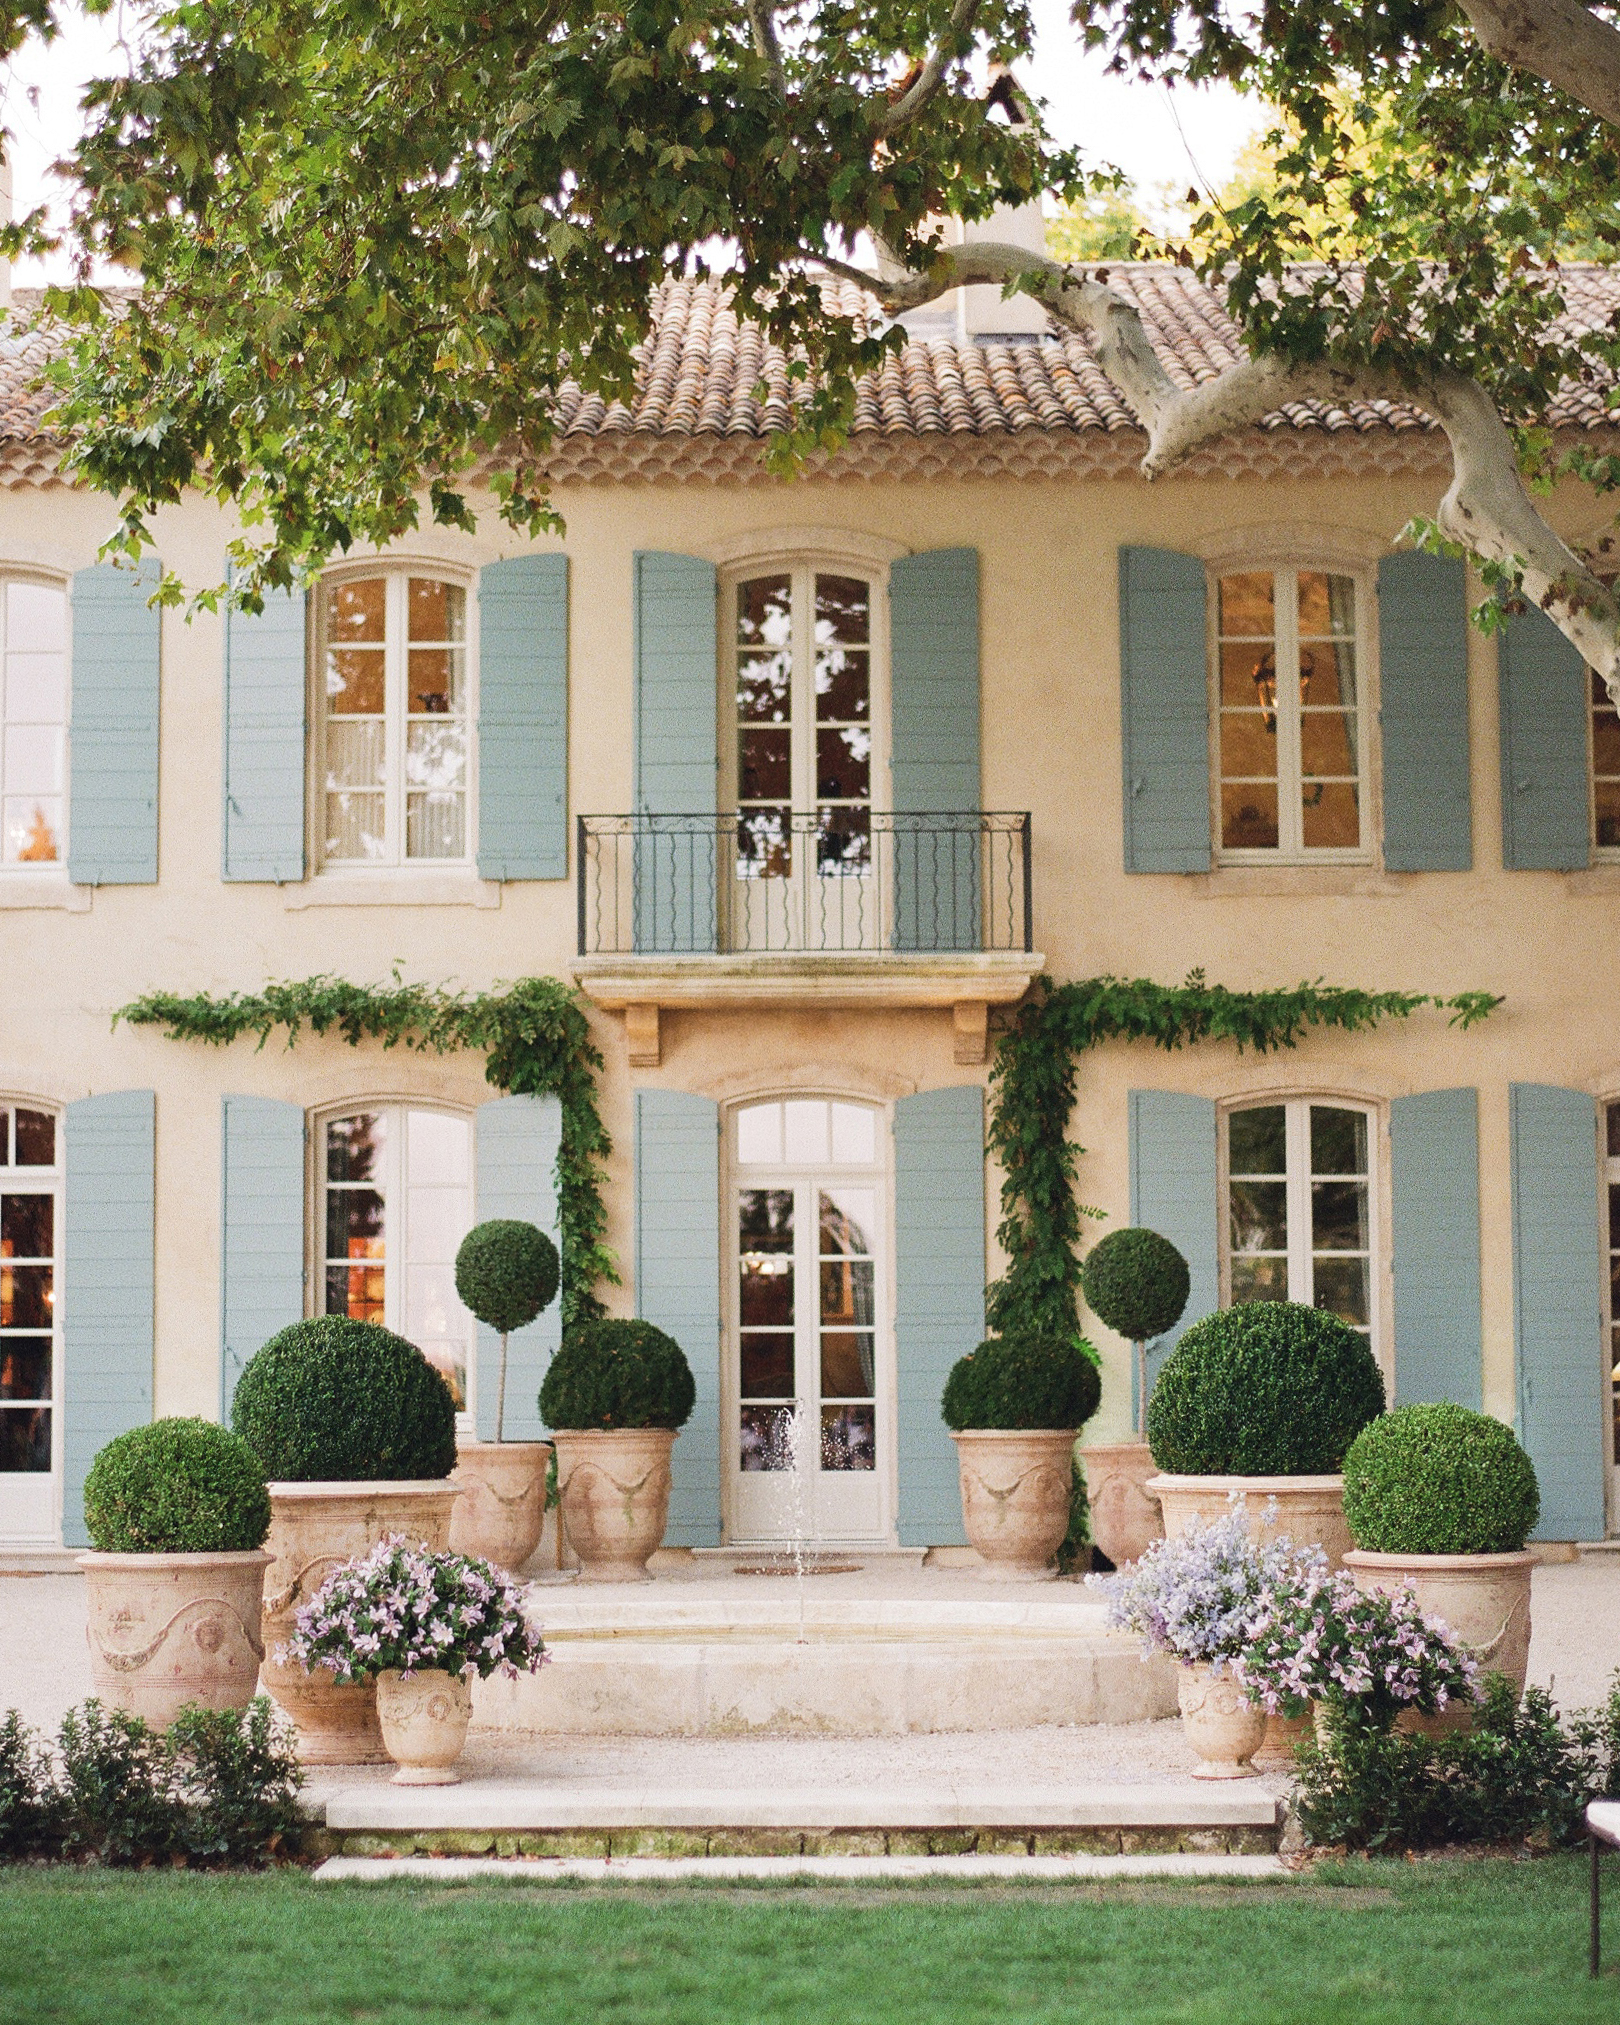 5 Homes That Inspired Our New Studio Curb Appeal